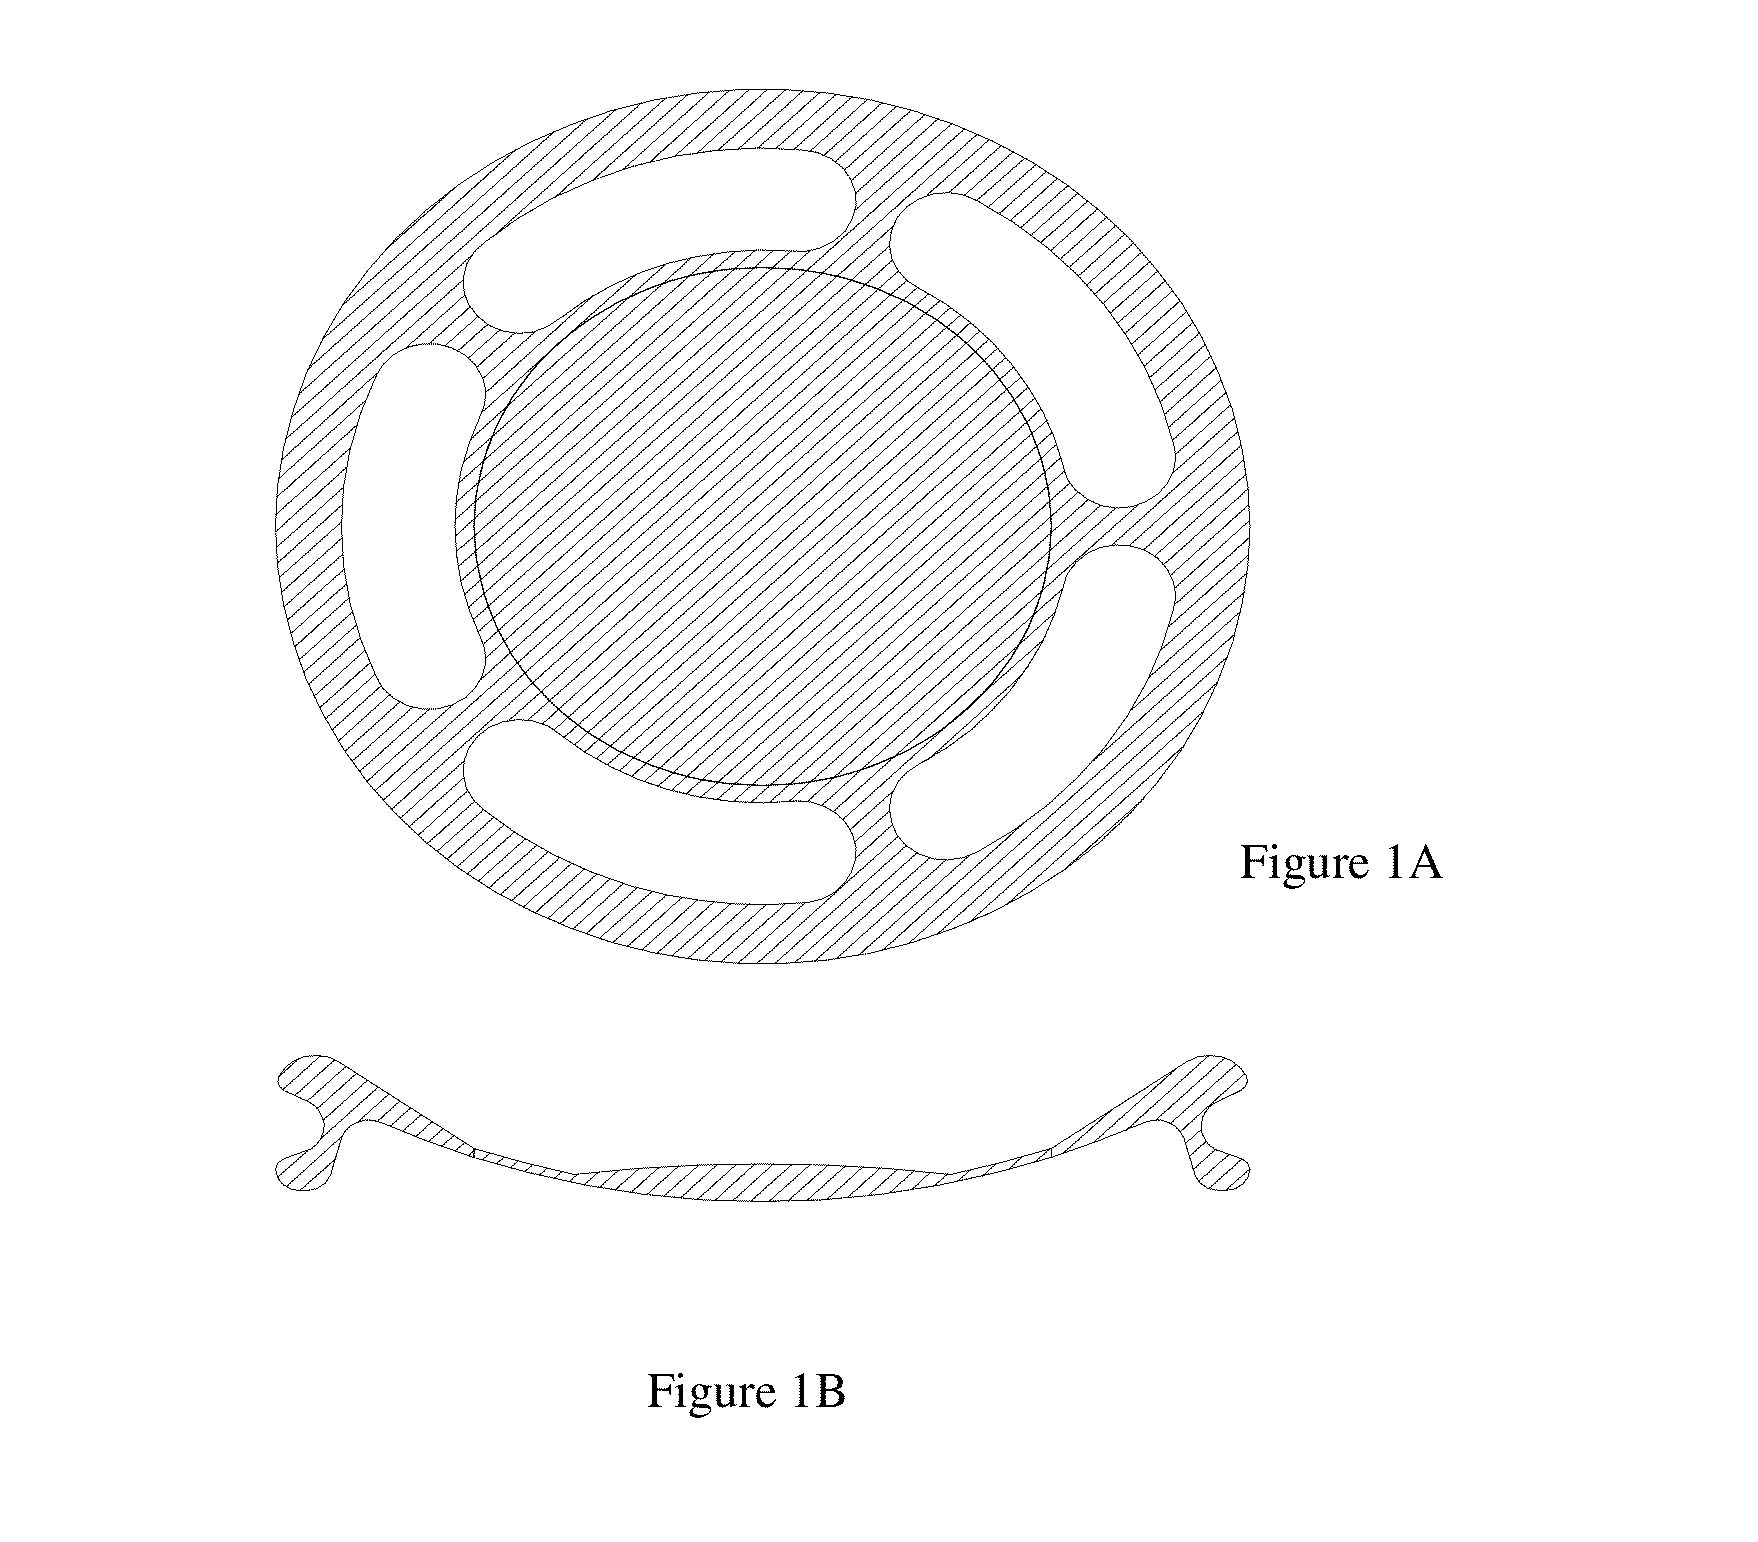 Haptic devices for intraocular lens